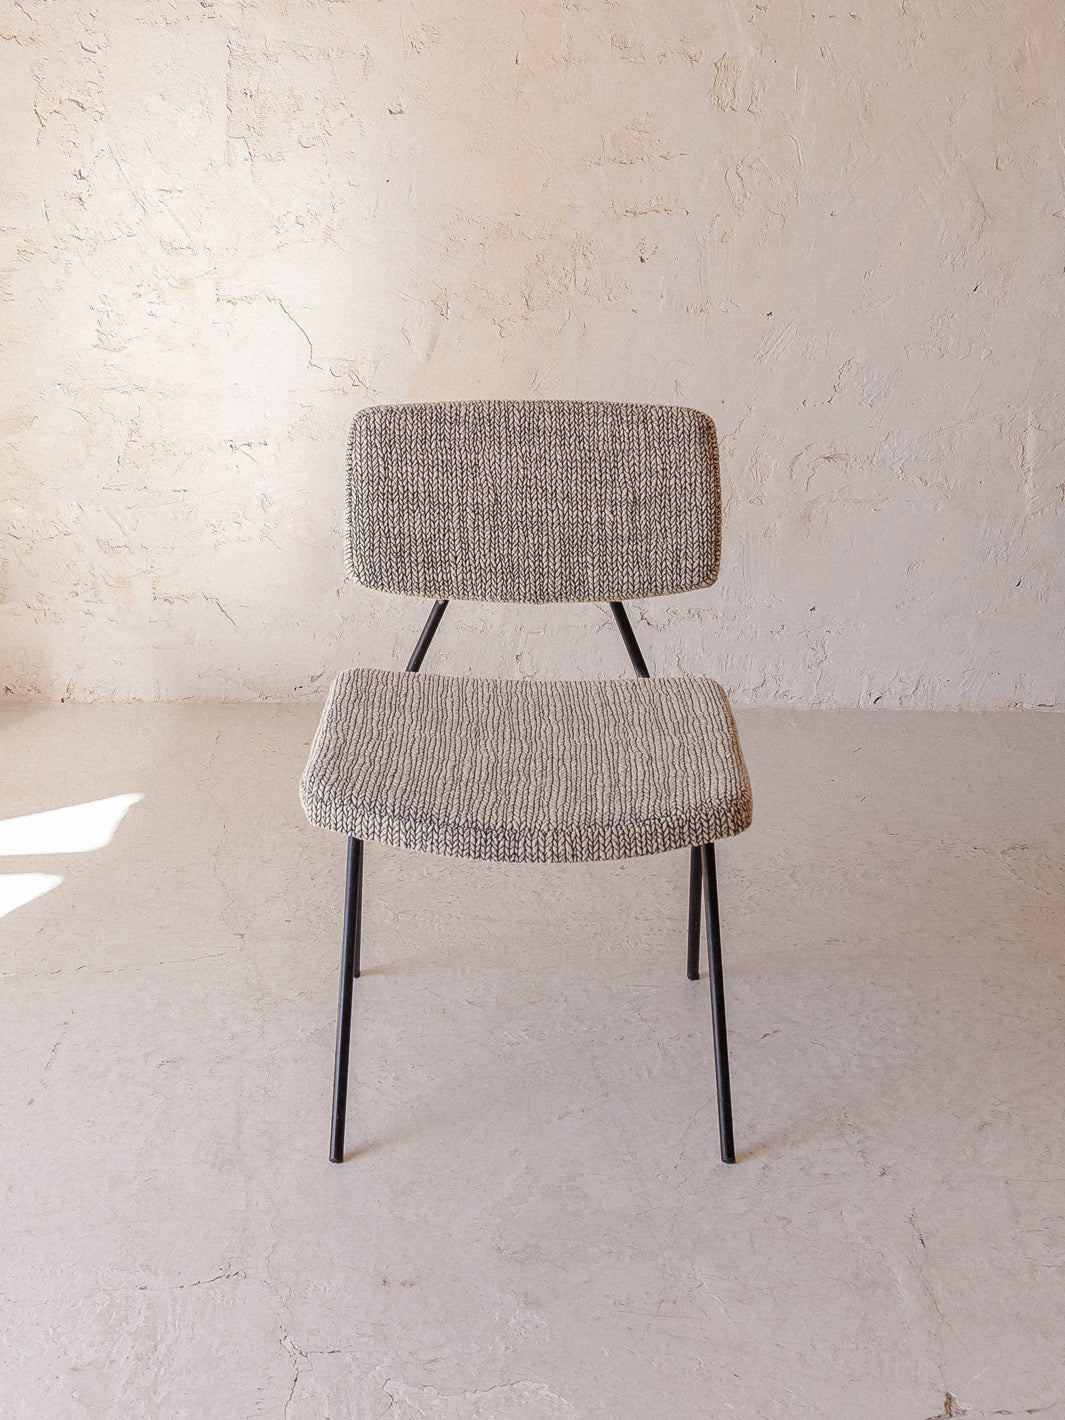 Pierre Guariche armchair from the 60s